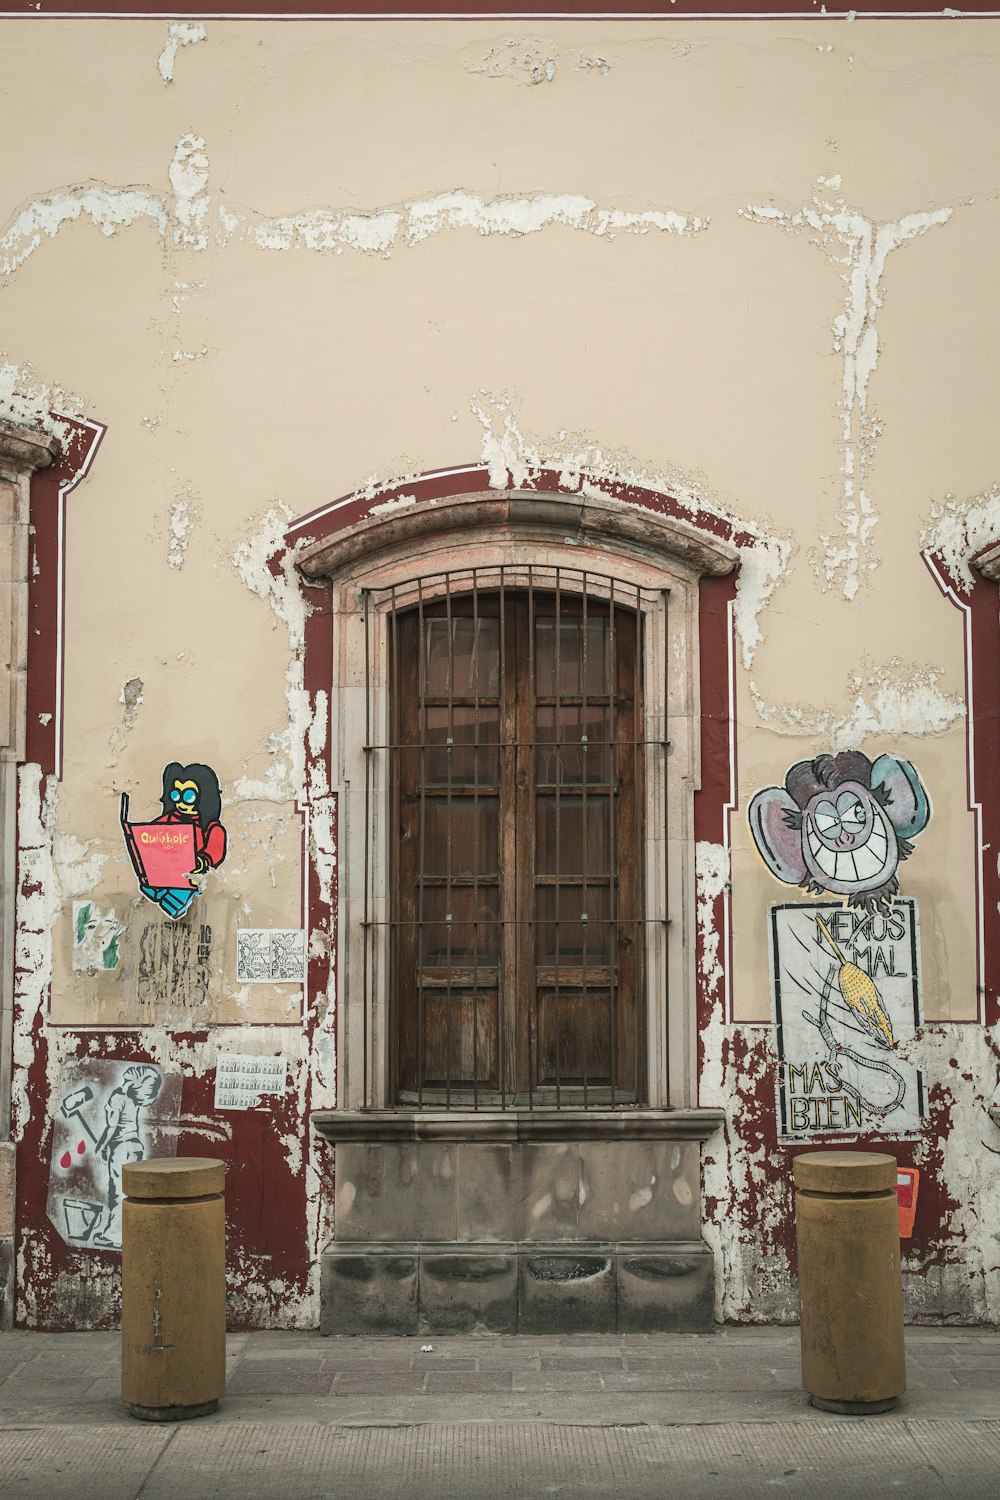 a building with graffiti on the side of it